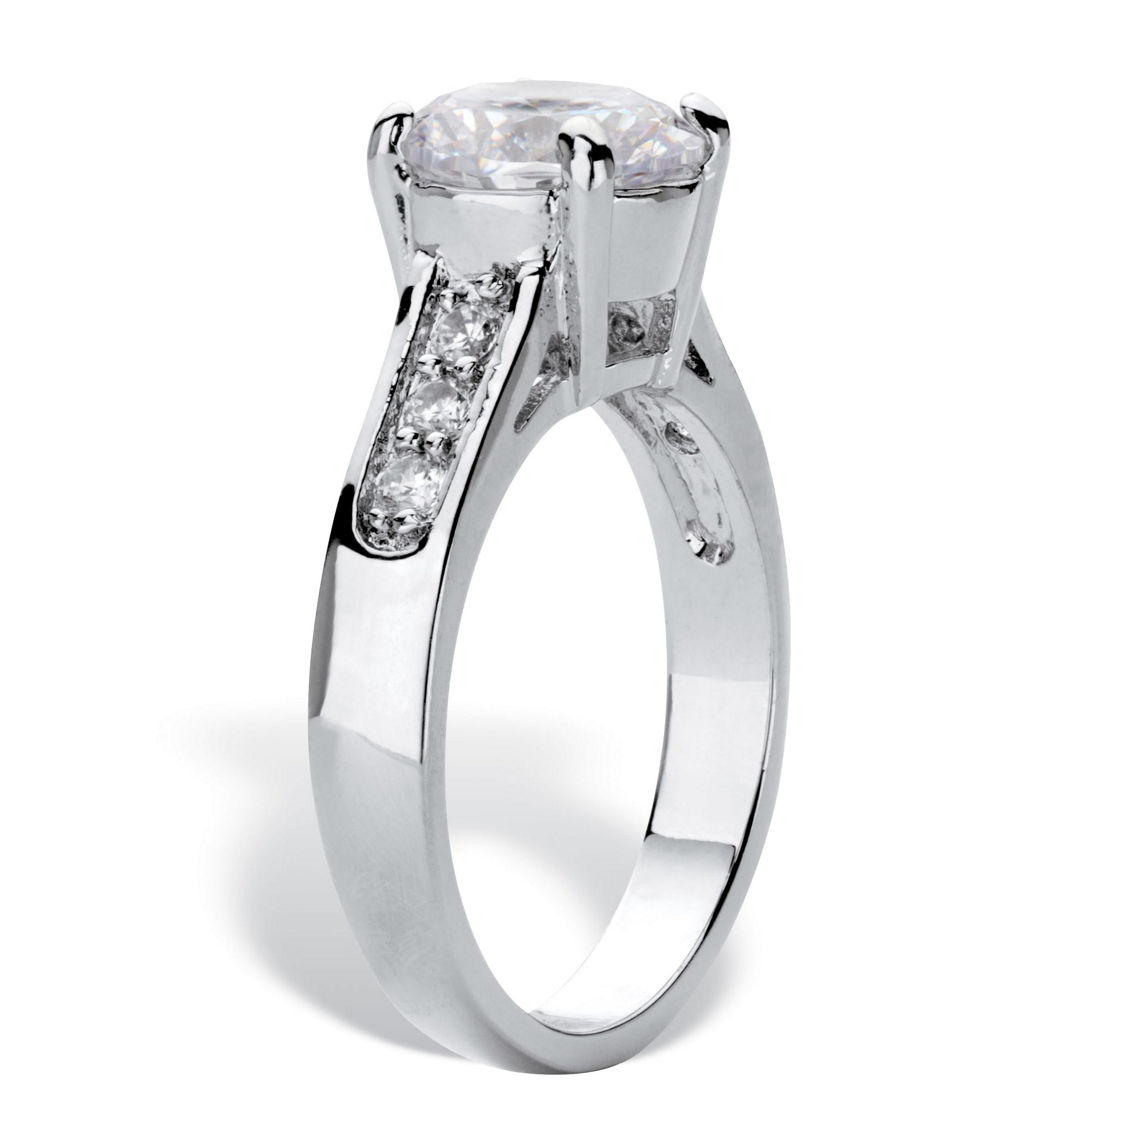 PalmBeach 2.20 TCW Round Cubic Zirconia Silvertone Engagement Anniversary Ring - Image 2 of 5